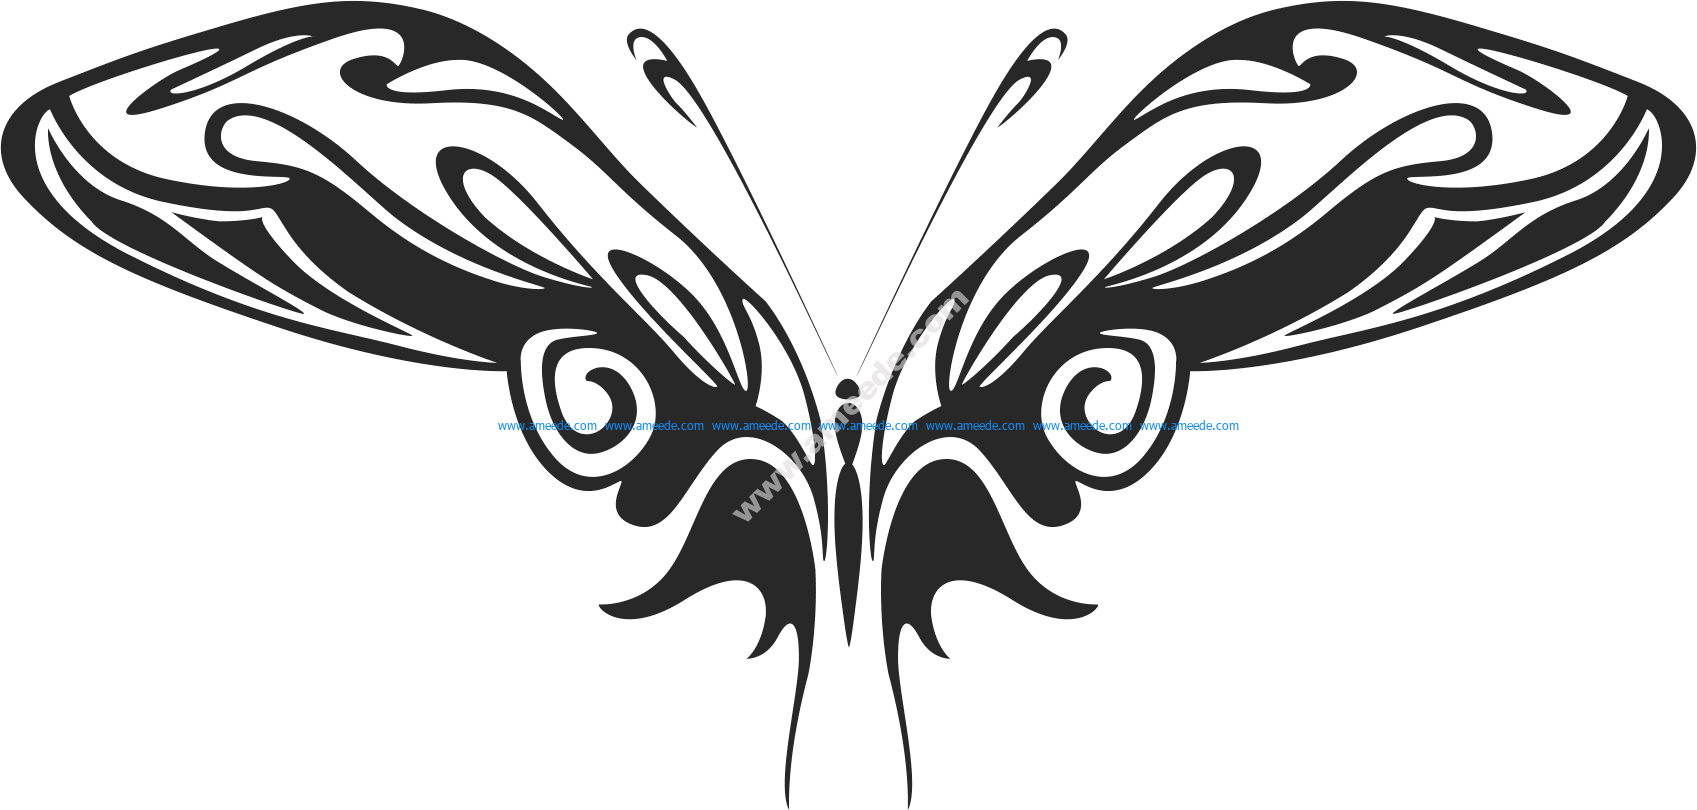 Tribal Butterfly Vector Art 15 - Download Free Vector